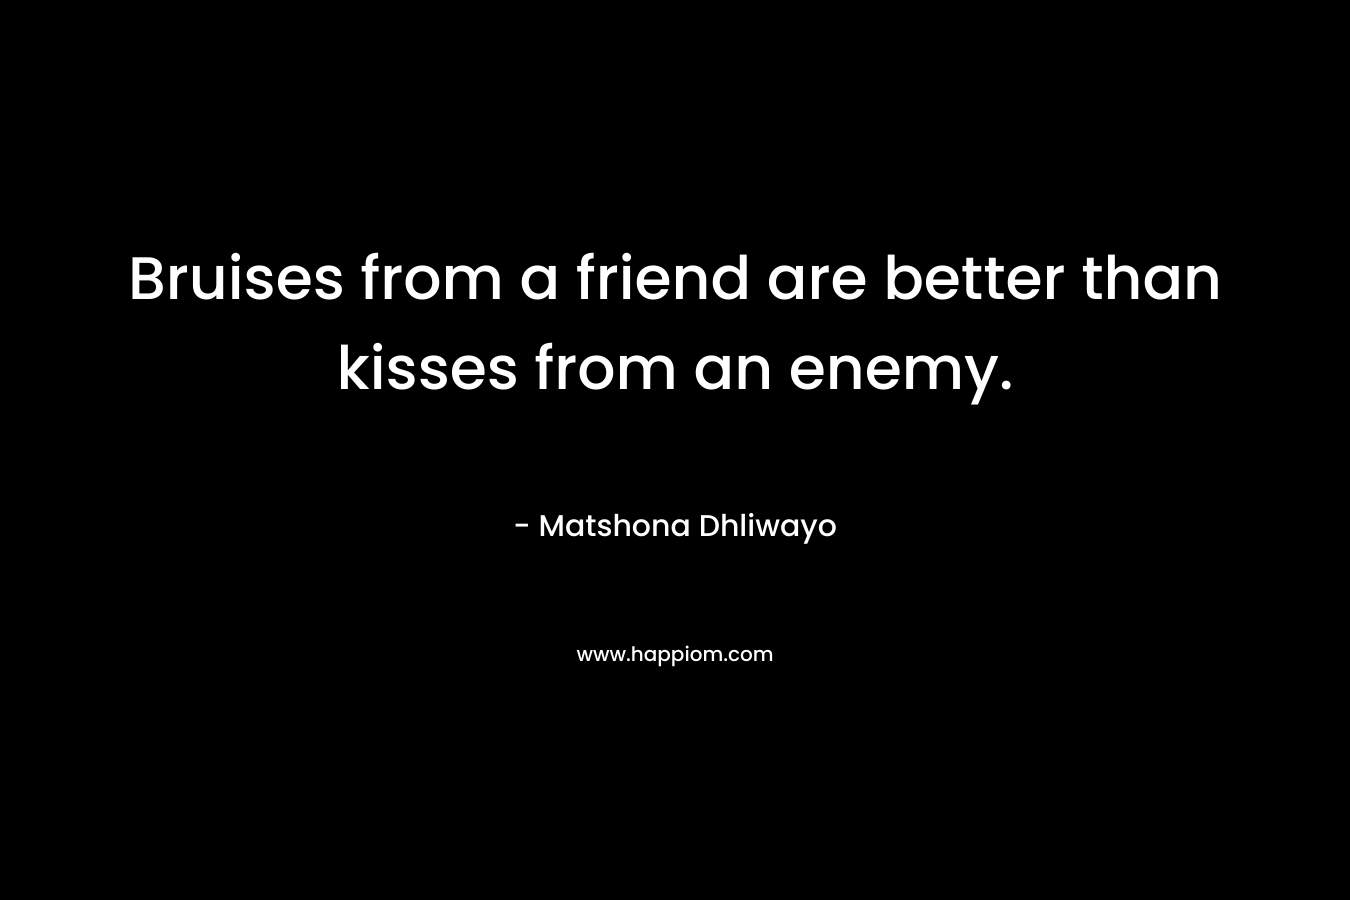 Bruises from a friend are better than kisses from an enemy. – Matshona Dhliwayo